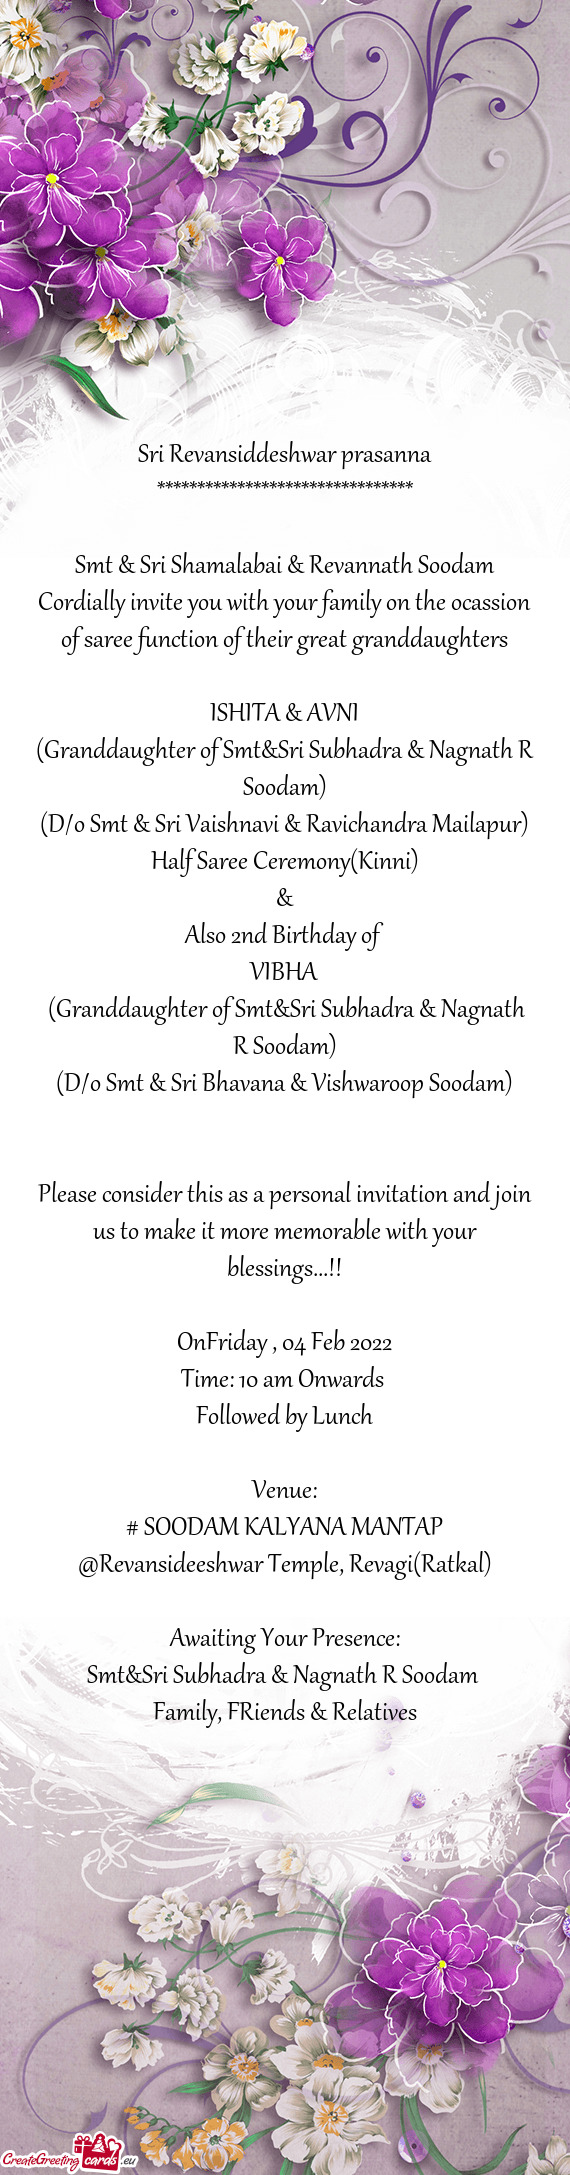 Cordially invite you with your family on the ocassion of saree function of their great granddaughter